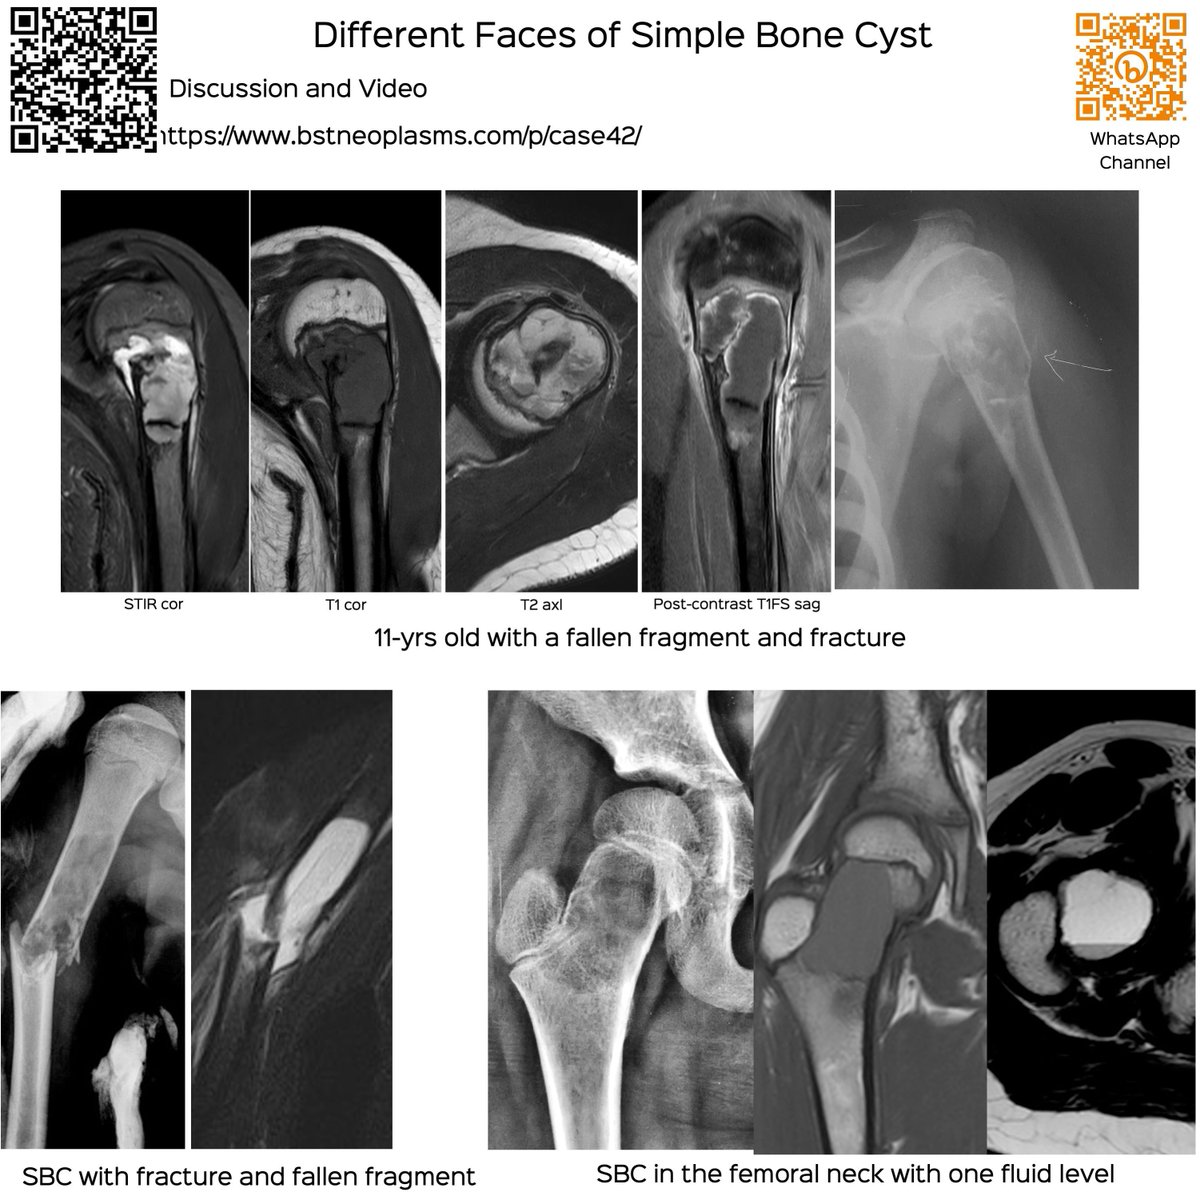 Different Faces of Simple Bone Cyst - SBC 50% occur in the humerus and 25% in the femoral neck Discussion and video bstneoplasms.com/p/case42/ #bstneoplasms #radres #humerus #simplebonecyst #SBC